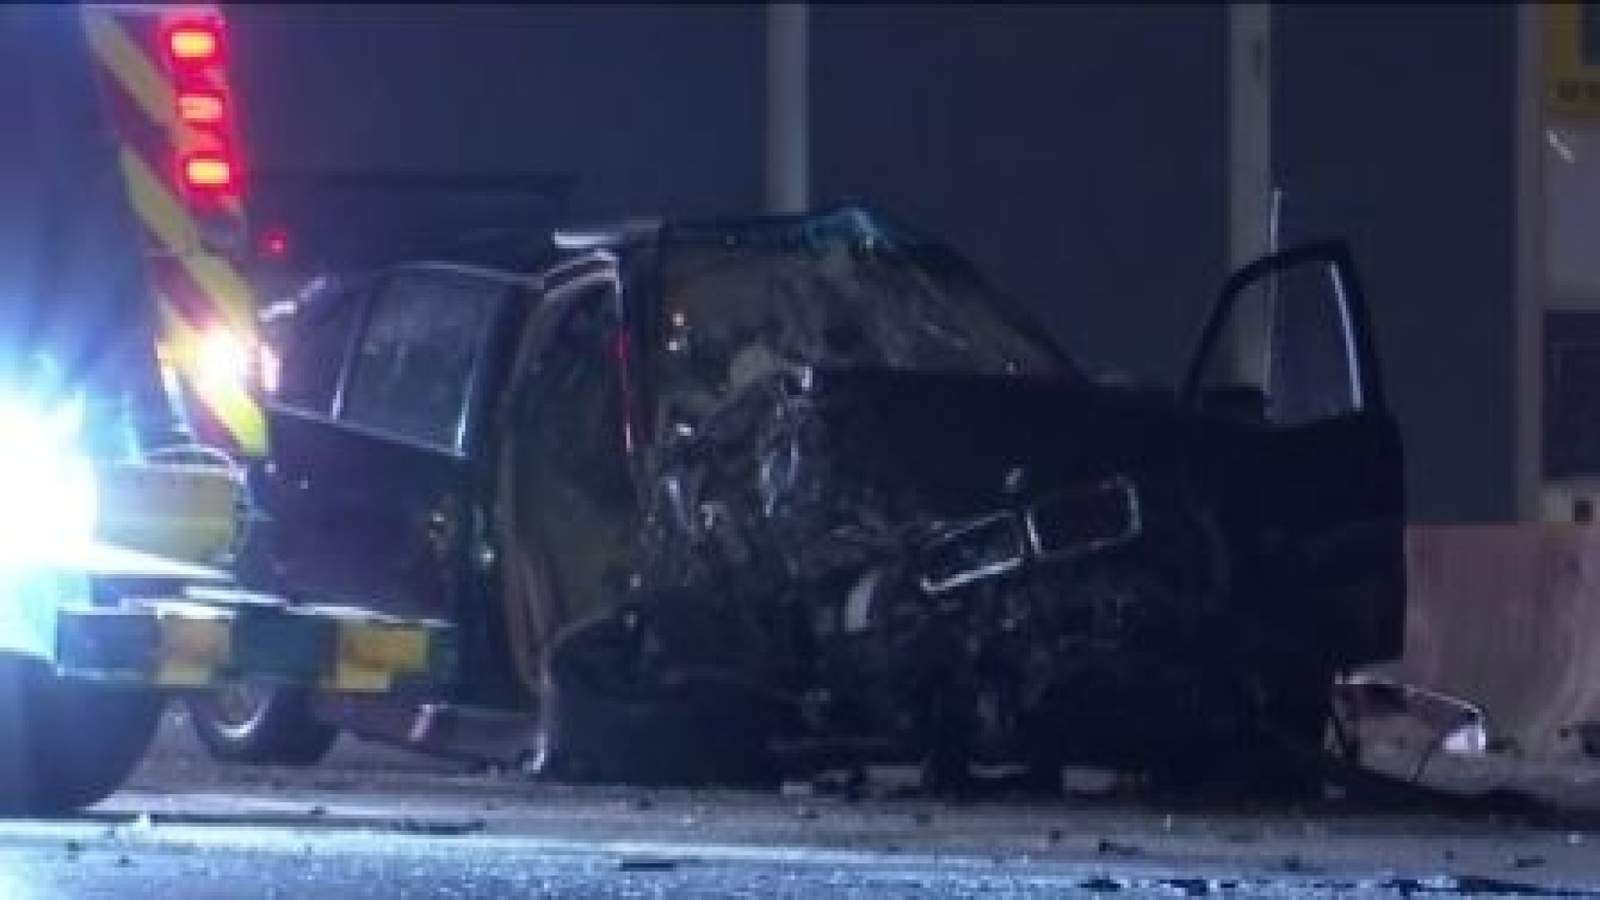 15-year-old girl, 4 firefighters injured after BMW slams into fire truck: Authorities